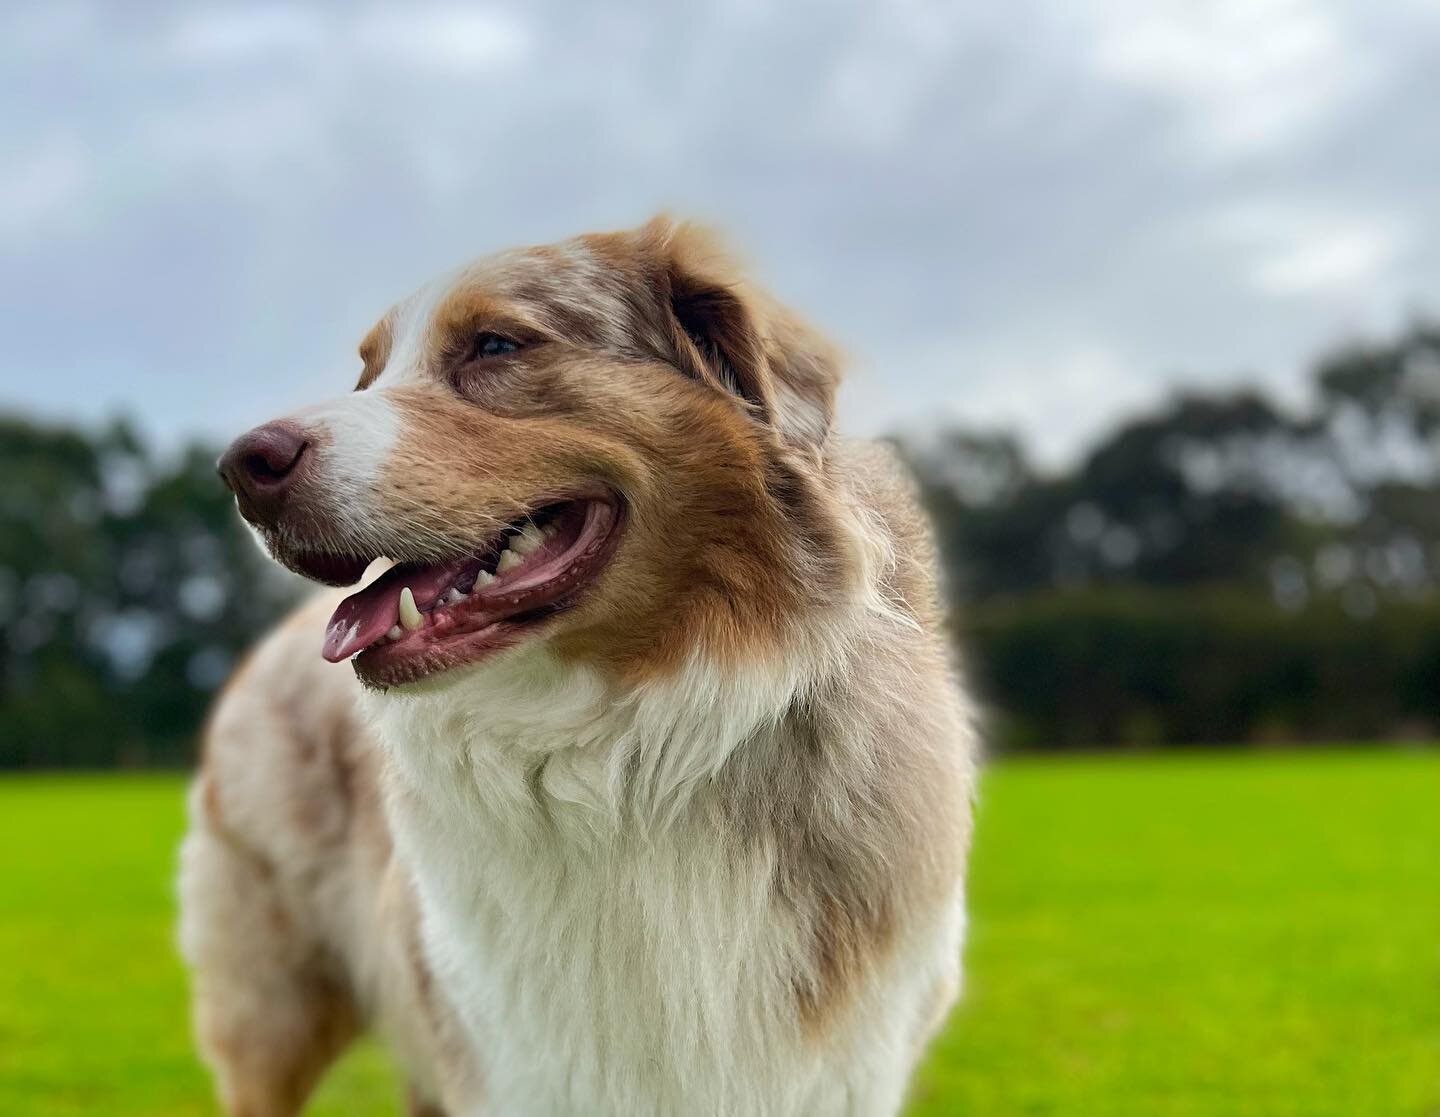 Mr Grins was particularly grinny this morning. 
.
.
.
.
#dogs #dogsofinstagram #dogsofmelbourne #australianshepherd #aussieshepherd #aussiesofinstagram #australianshepherdsofinstagram #dogphotography #dogphoto #dogwalkersofmelbourne #dogwalking #dogw